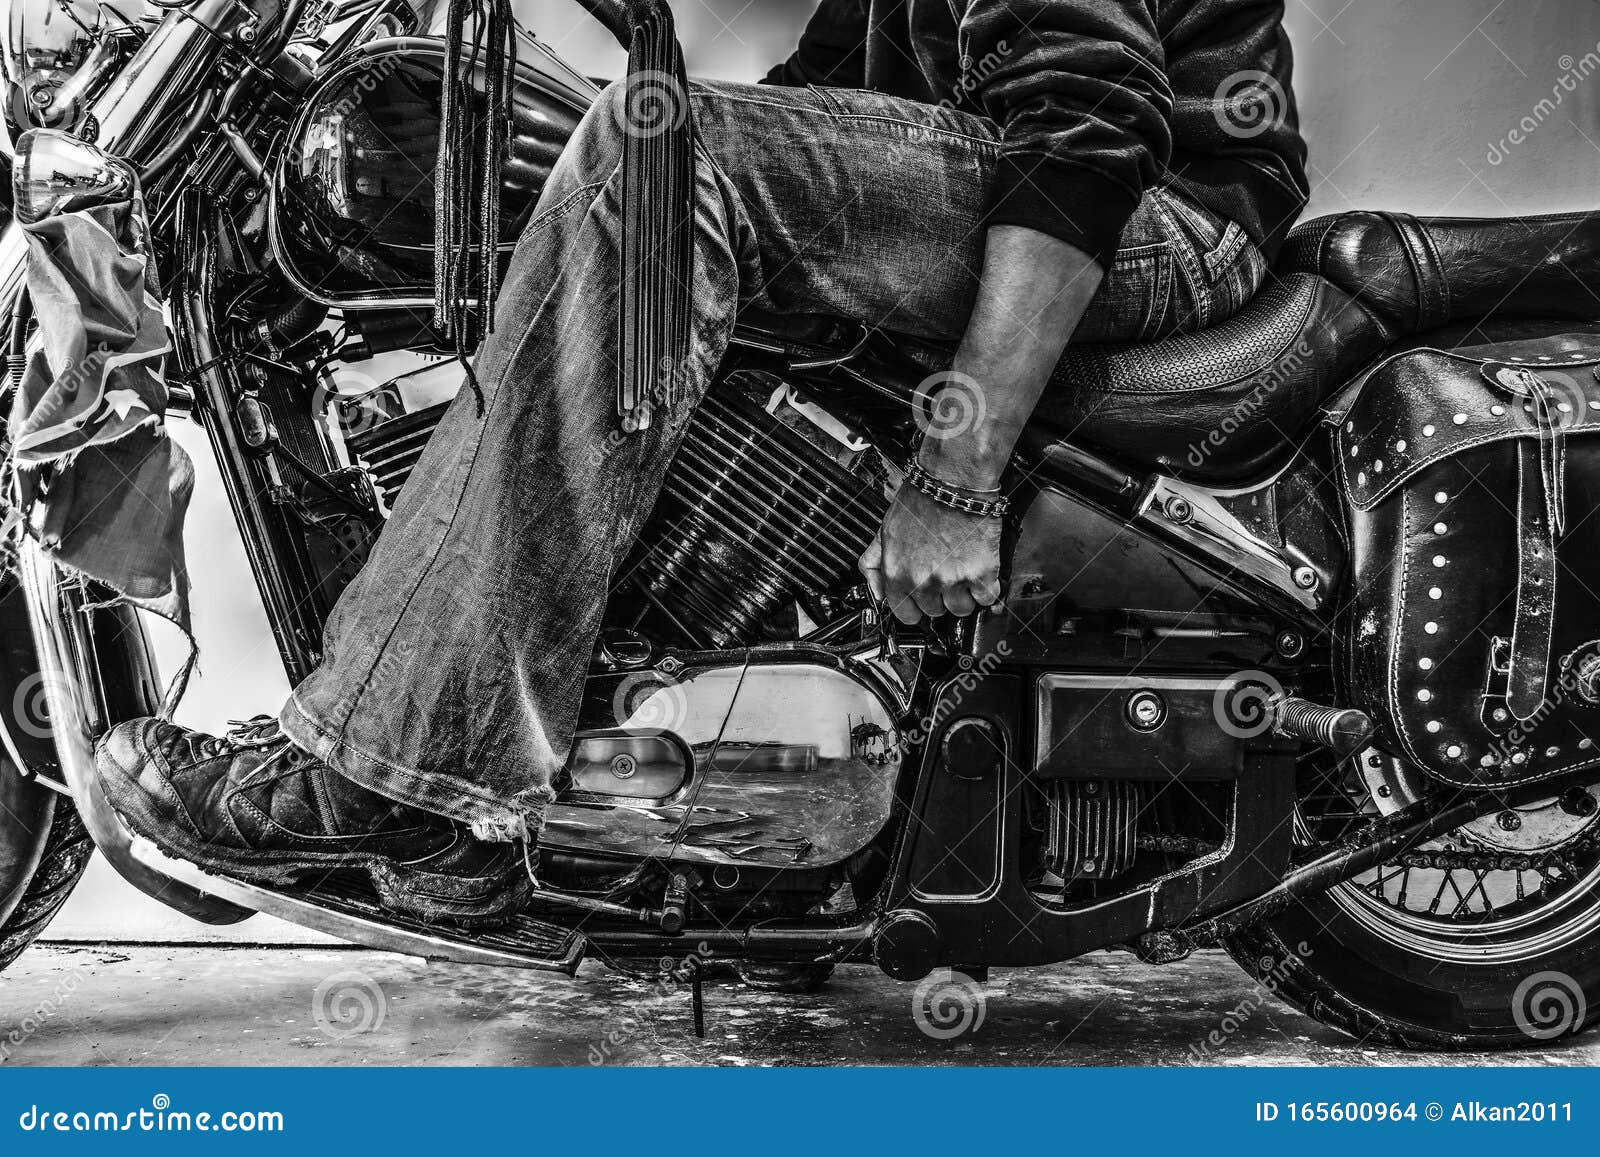 Biker Starting a Motorcycle in Black and White Stock Photo - Image of ...